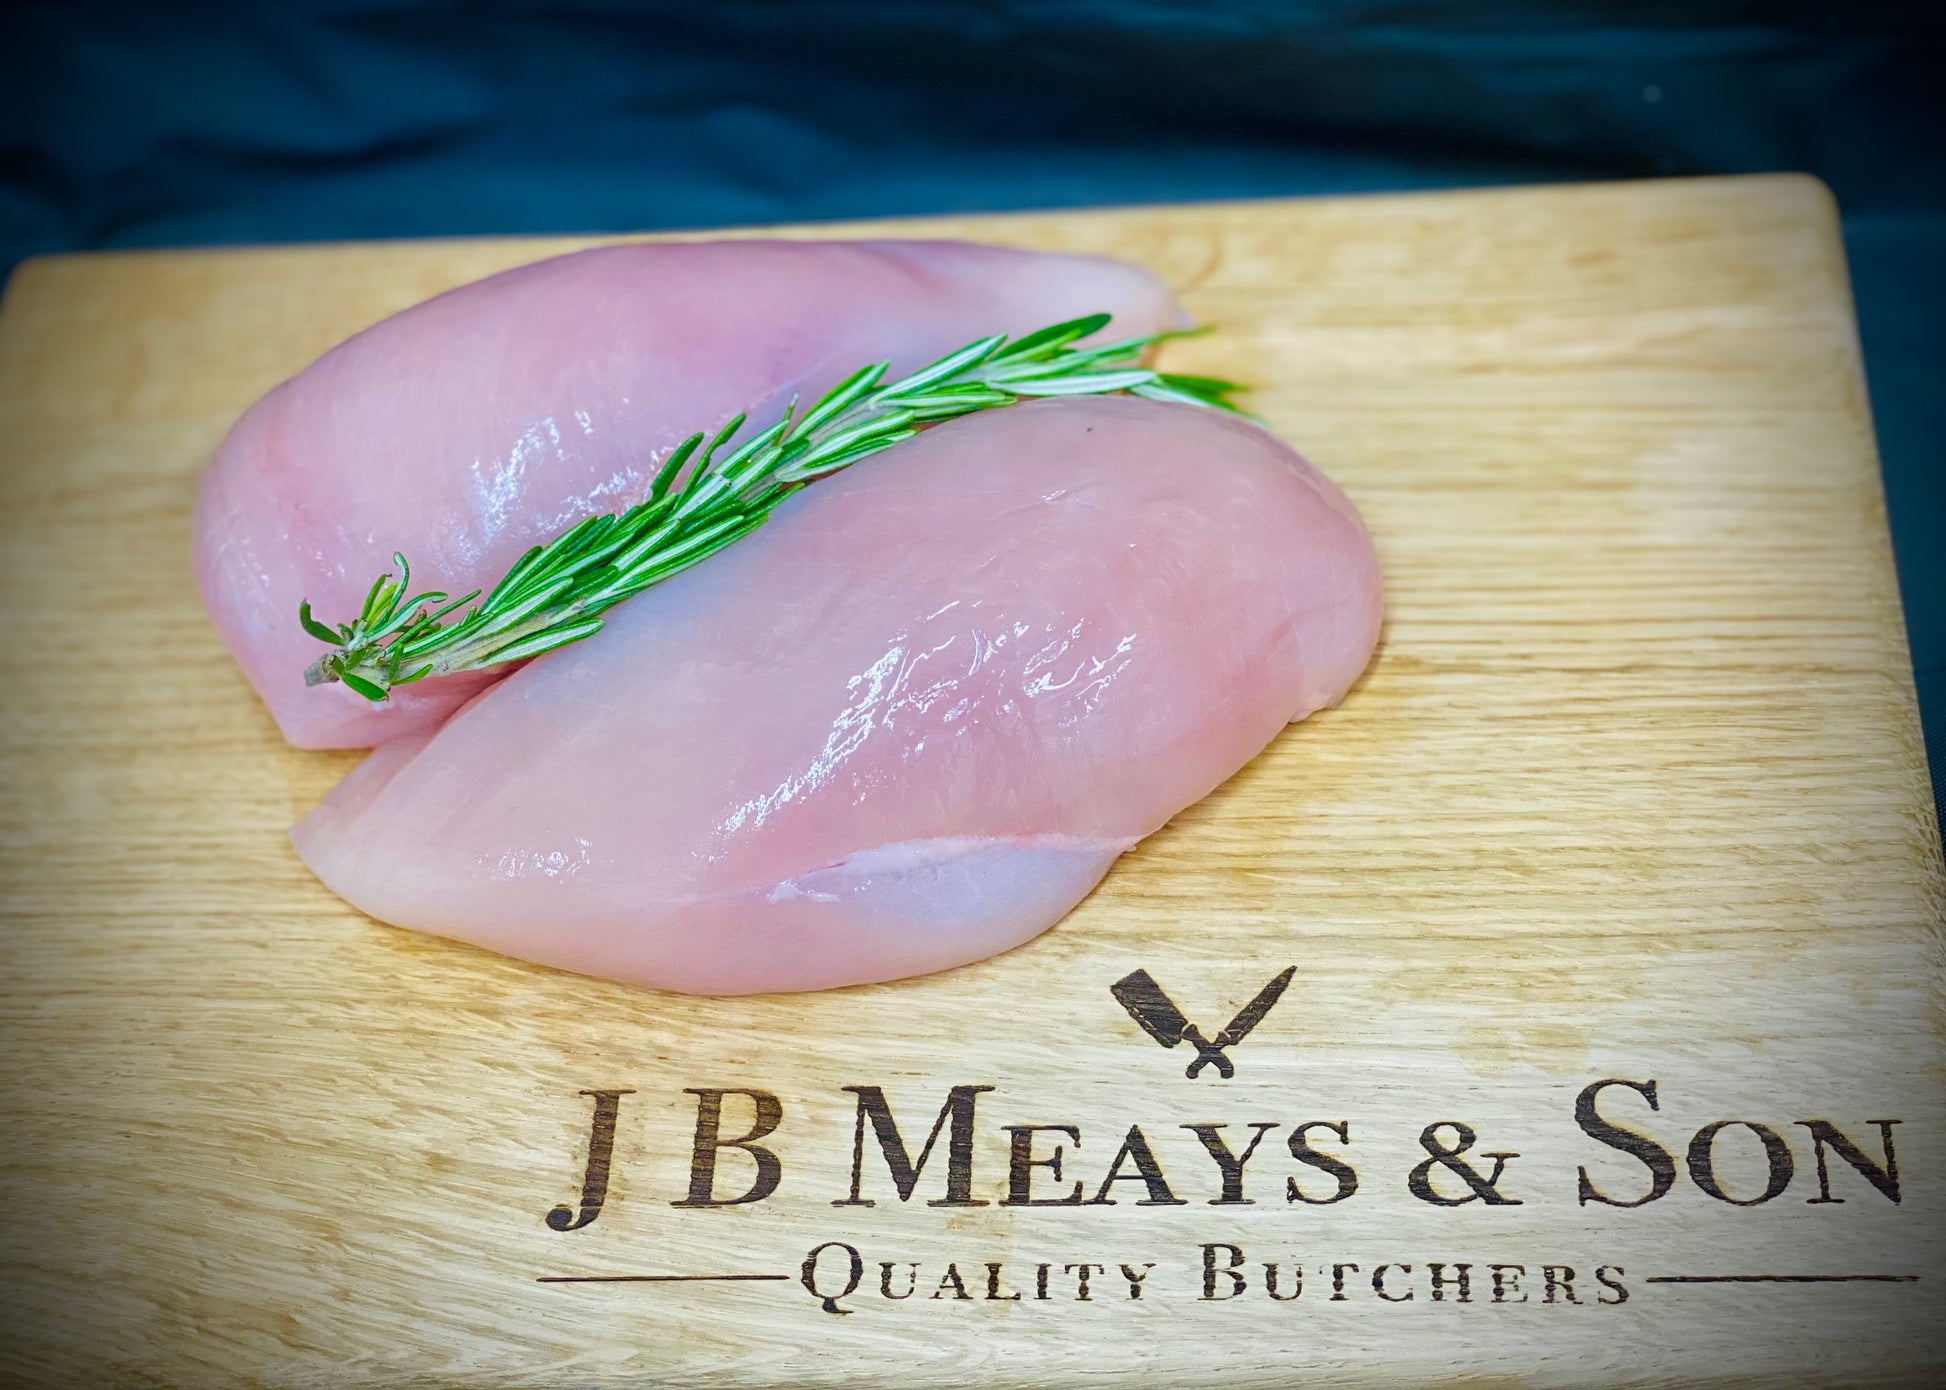 Fresh chicken fillets, locally sourced from North Yorkshire. Ideal for curries, fajitas, stir fry's & lots of other family favourites.